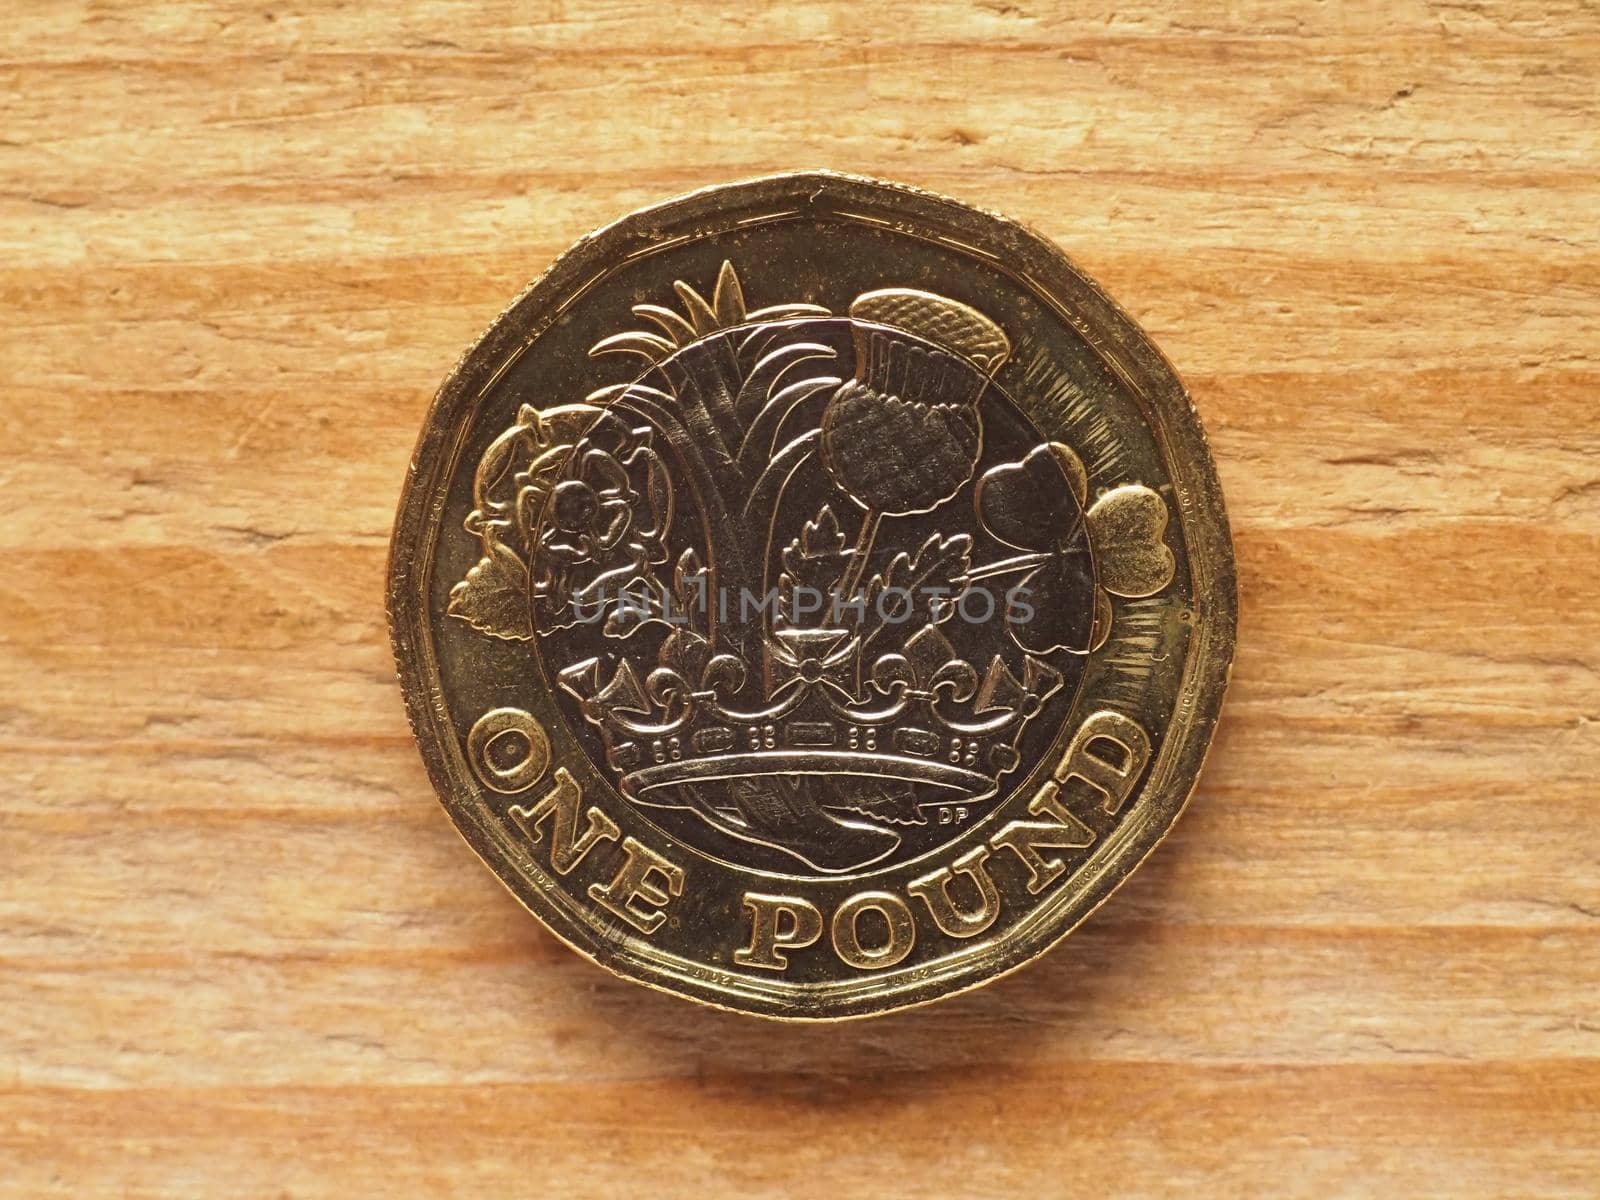 one pound coin reverse side showing Nations of the Crown, currency of the United Kingdom